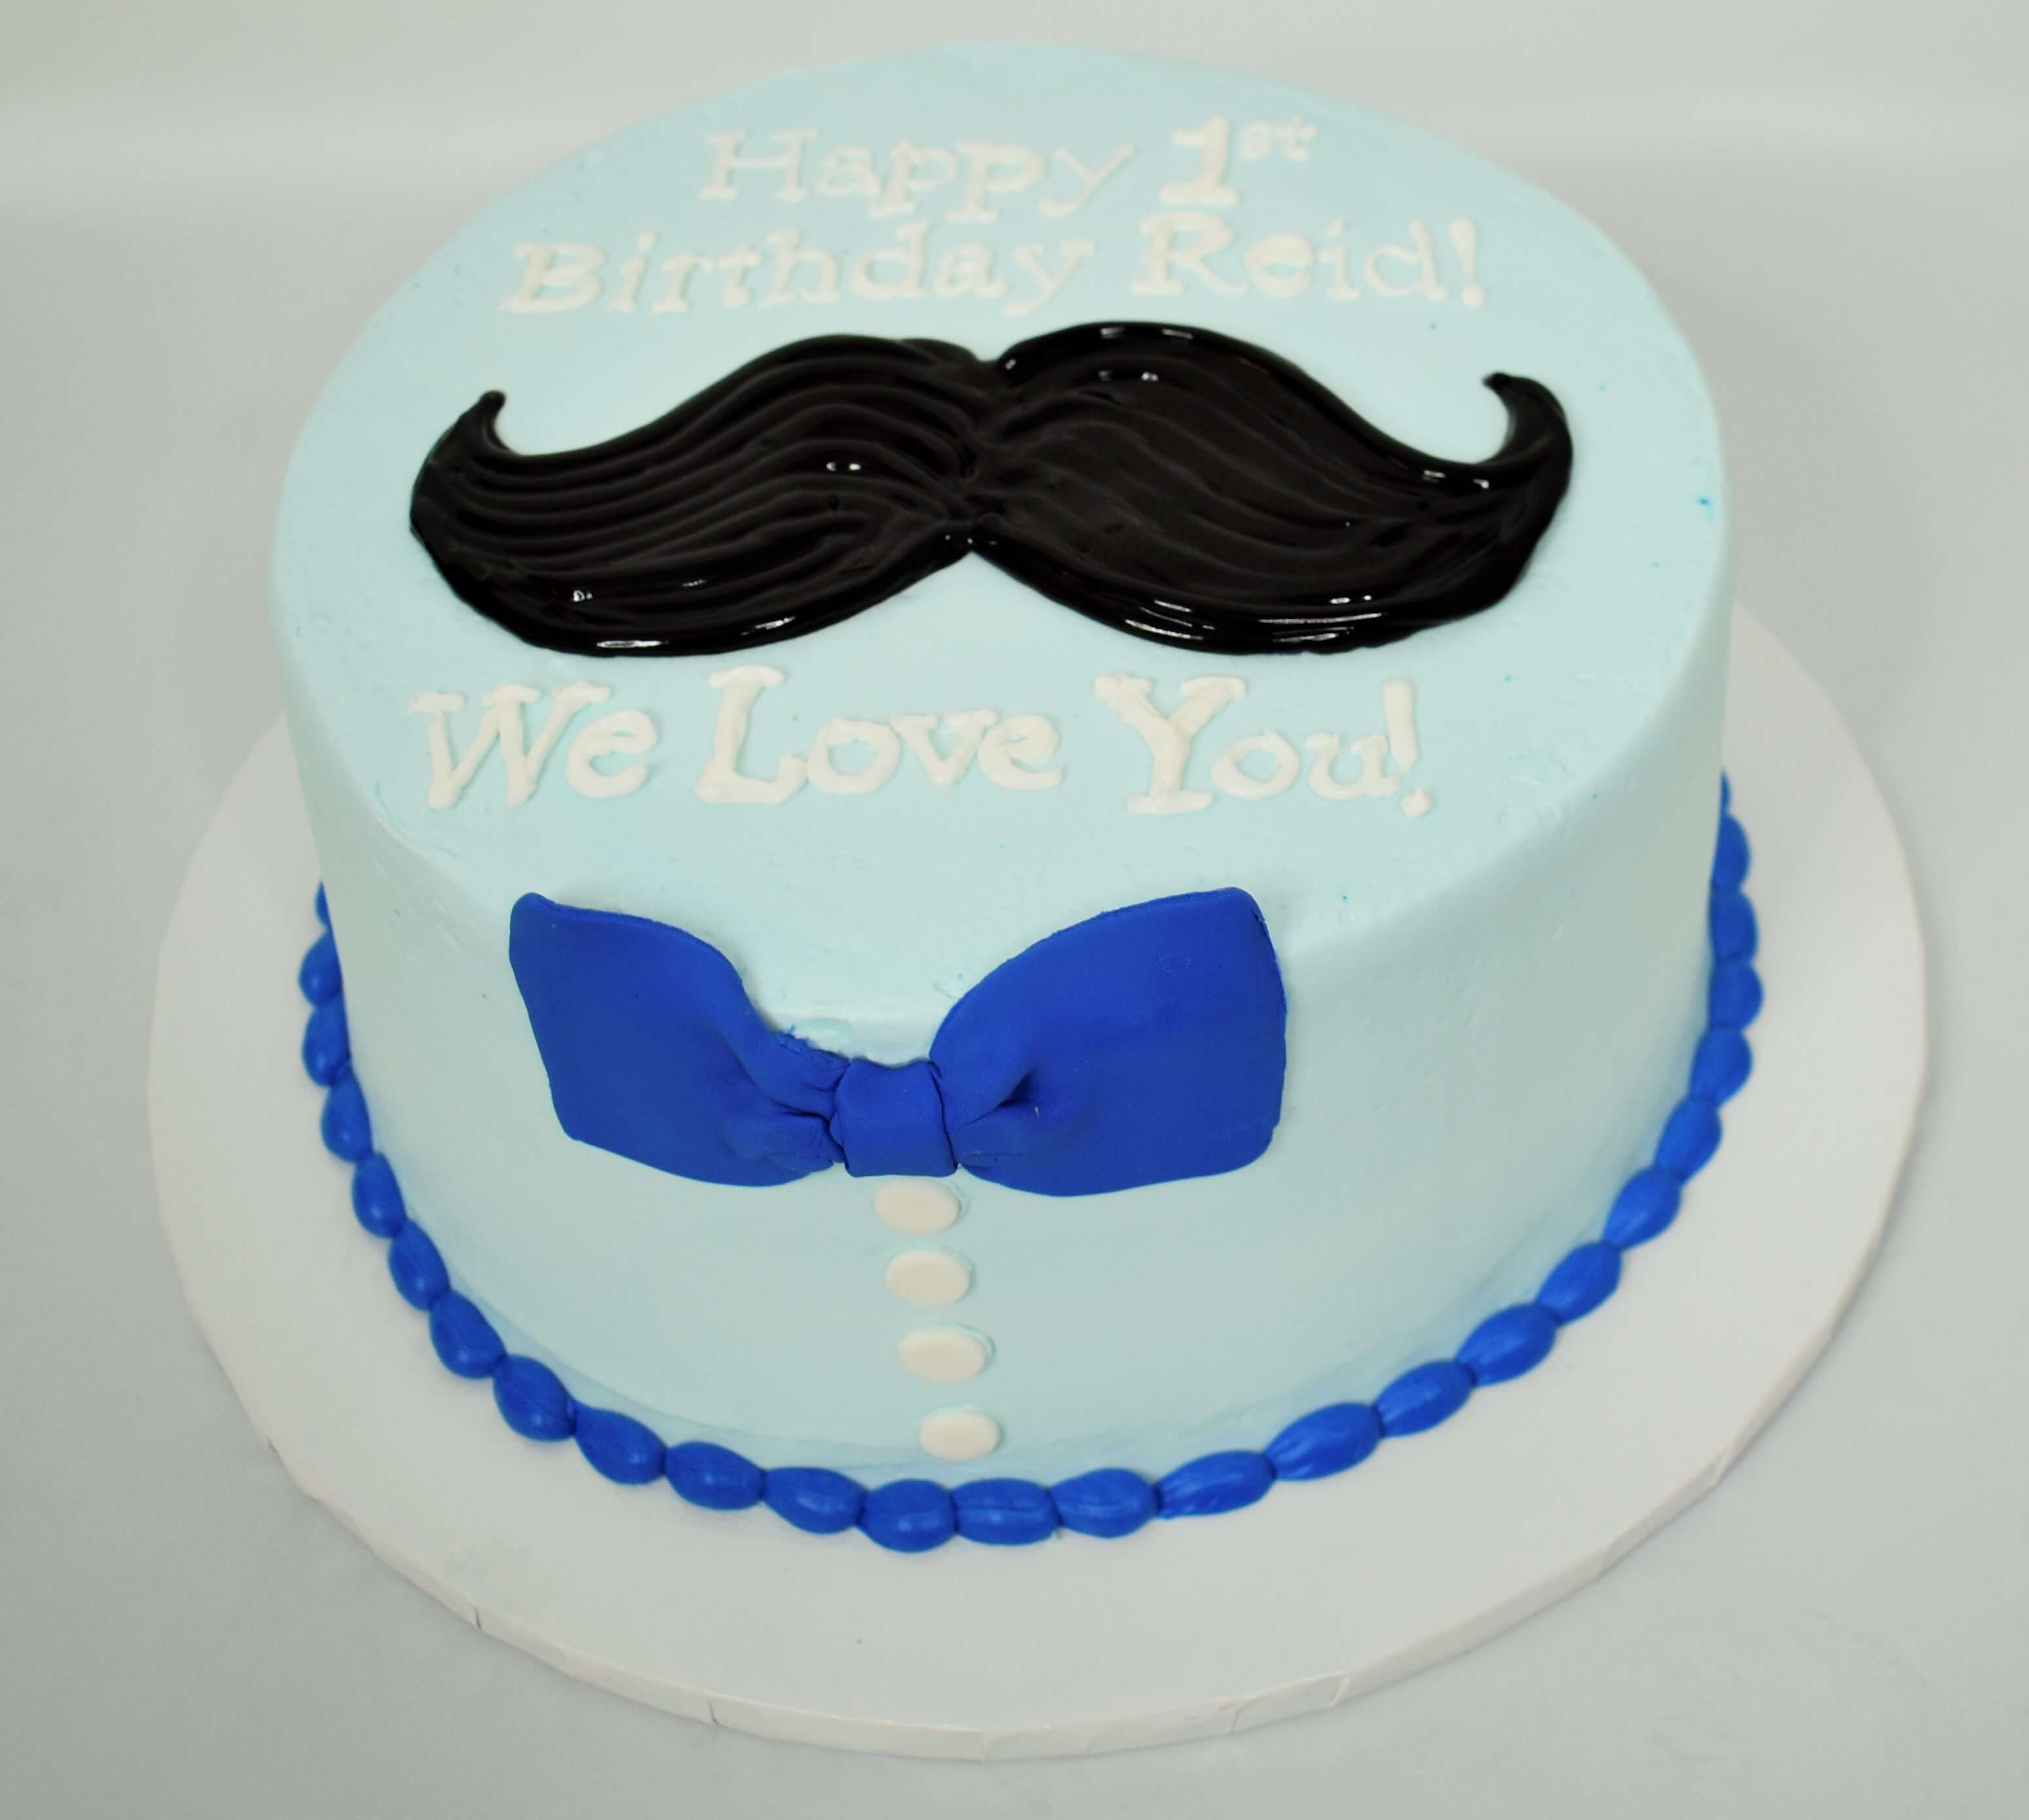 McArthur's Bakery Custom Cake with Black Mustache and Blue Bowtie